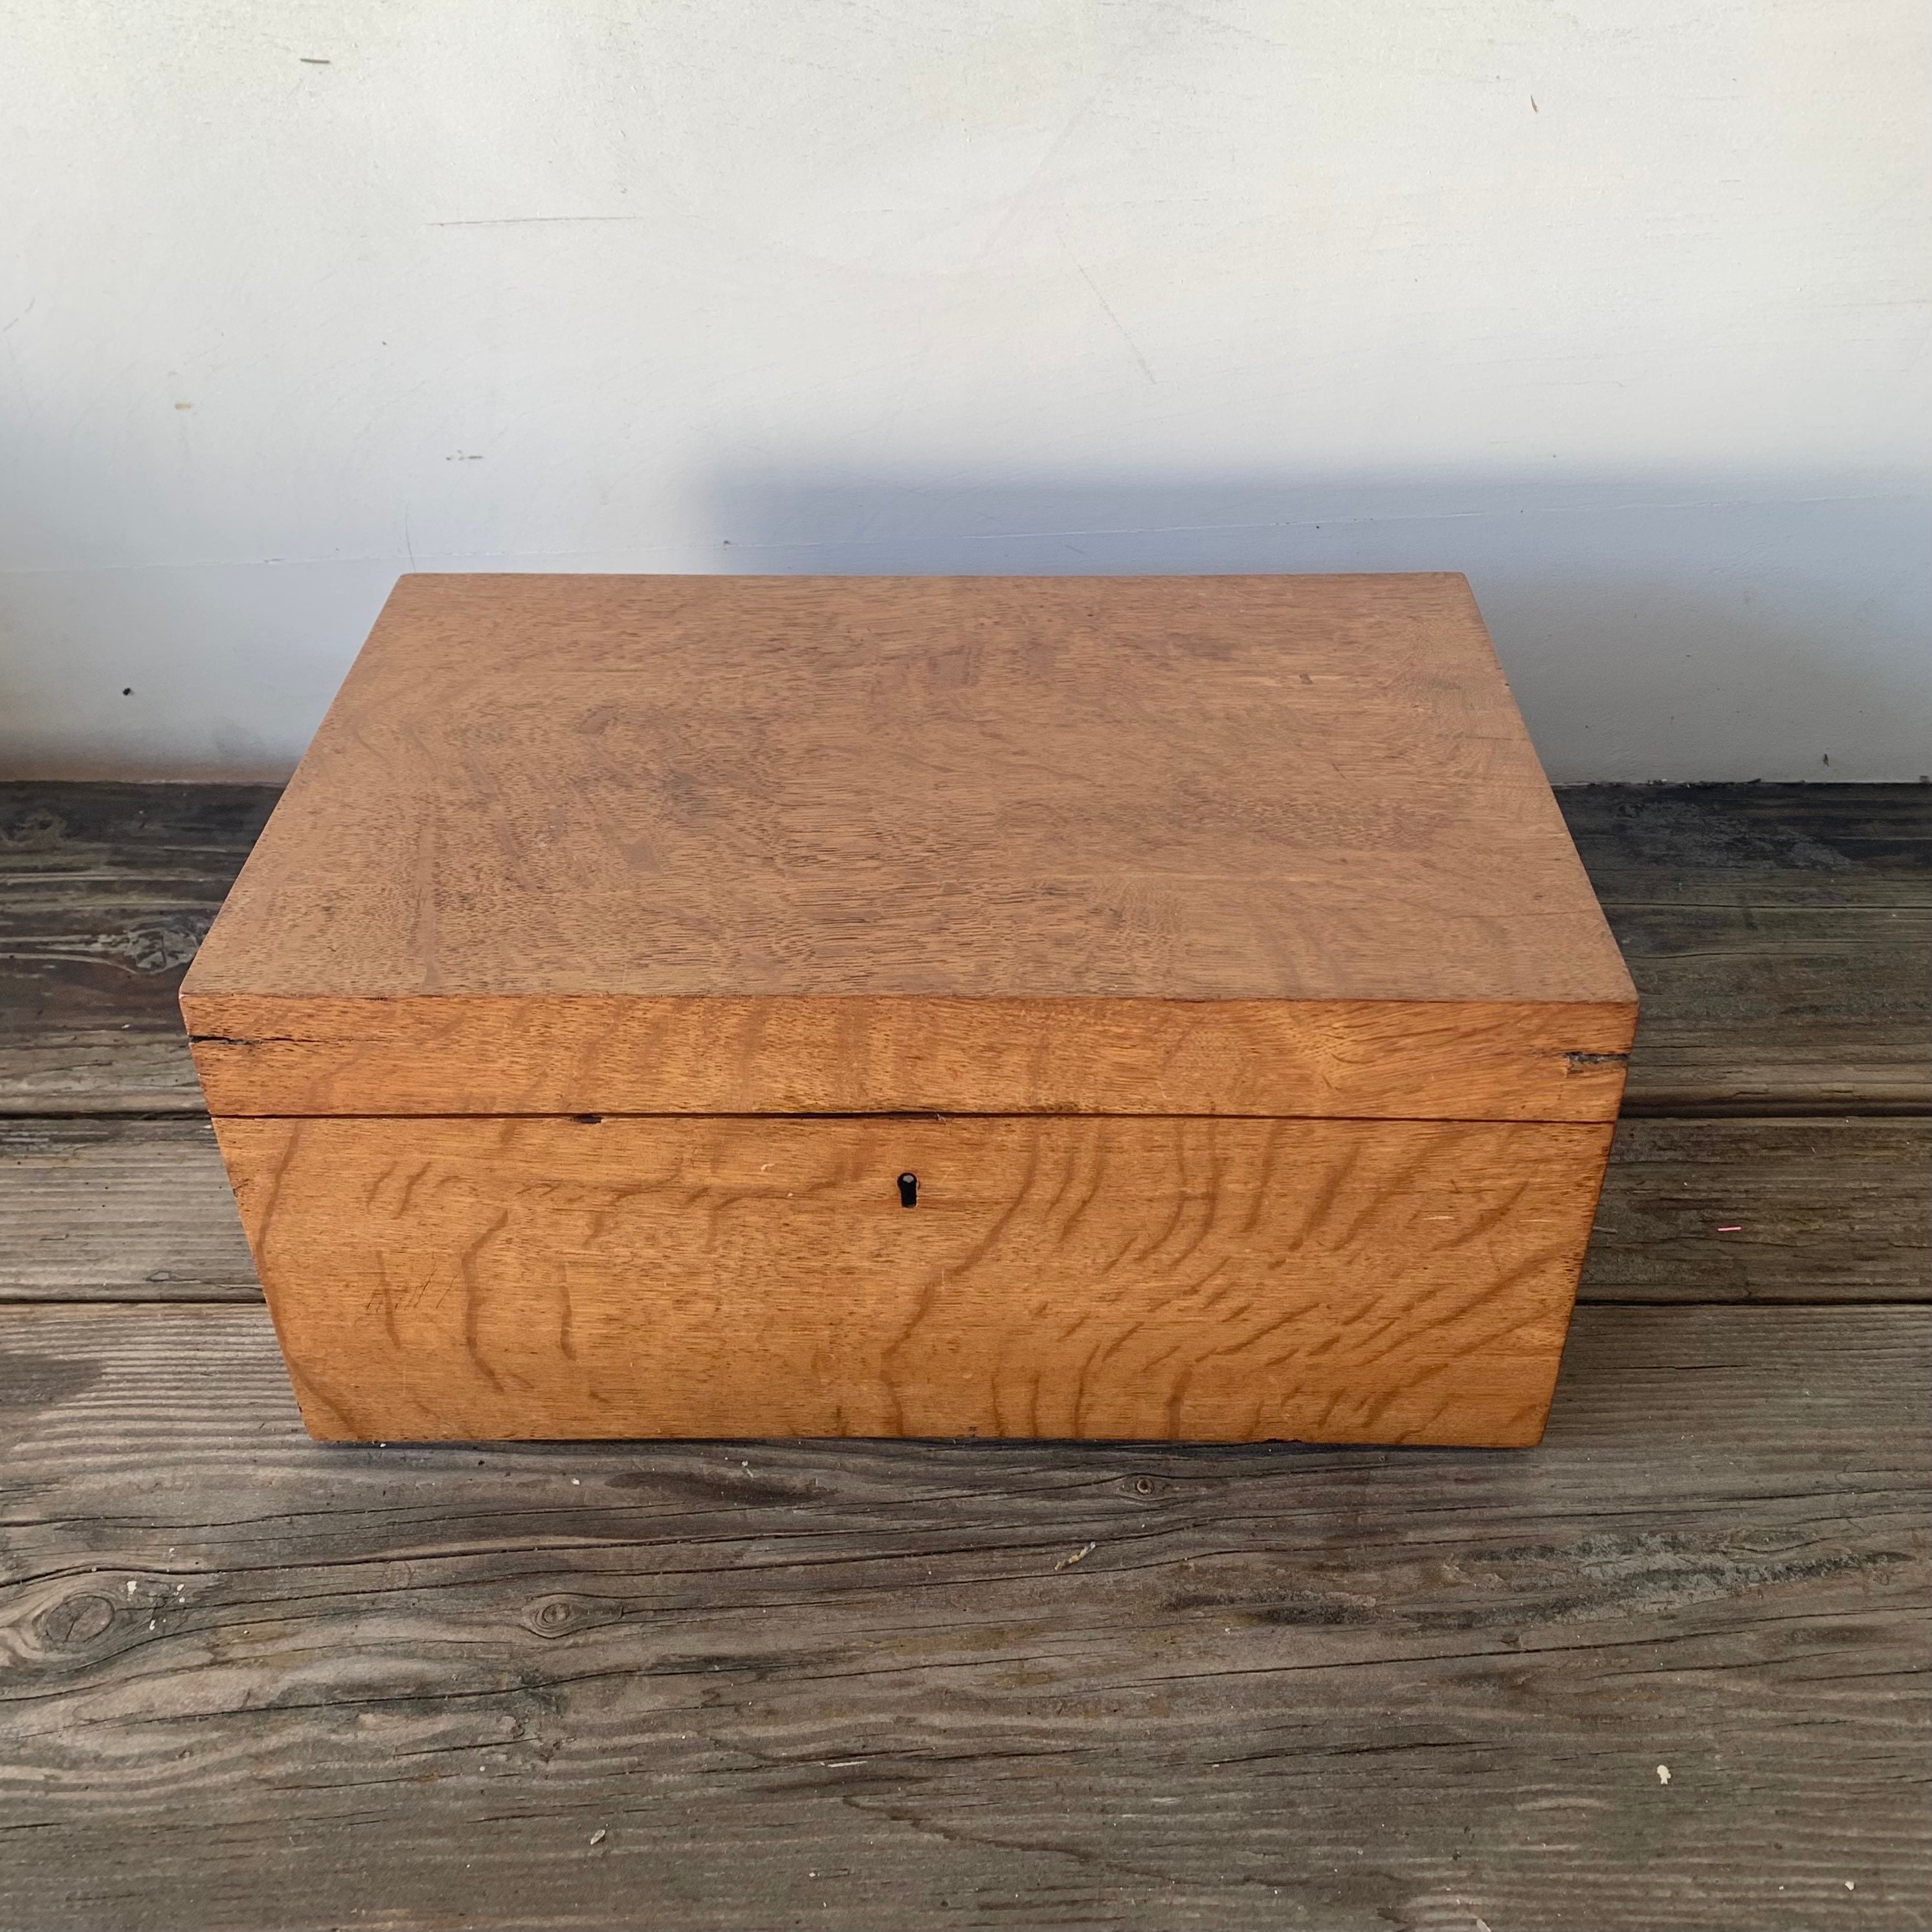 Document Box With Lid 